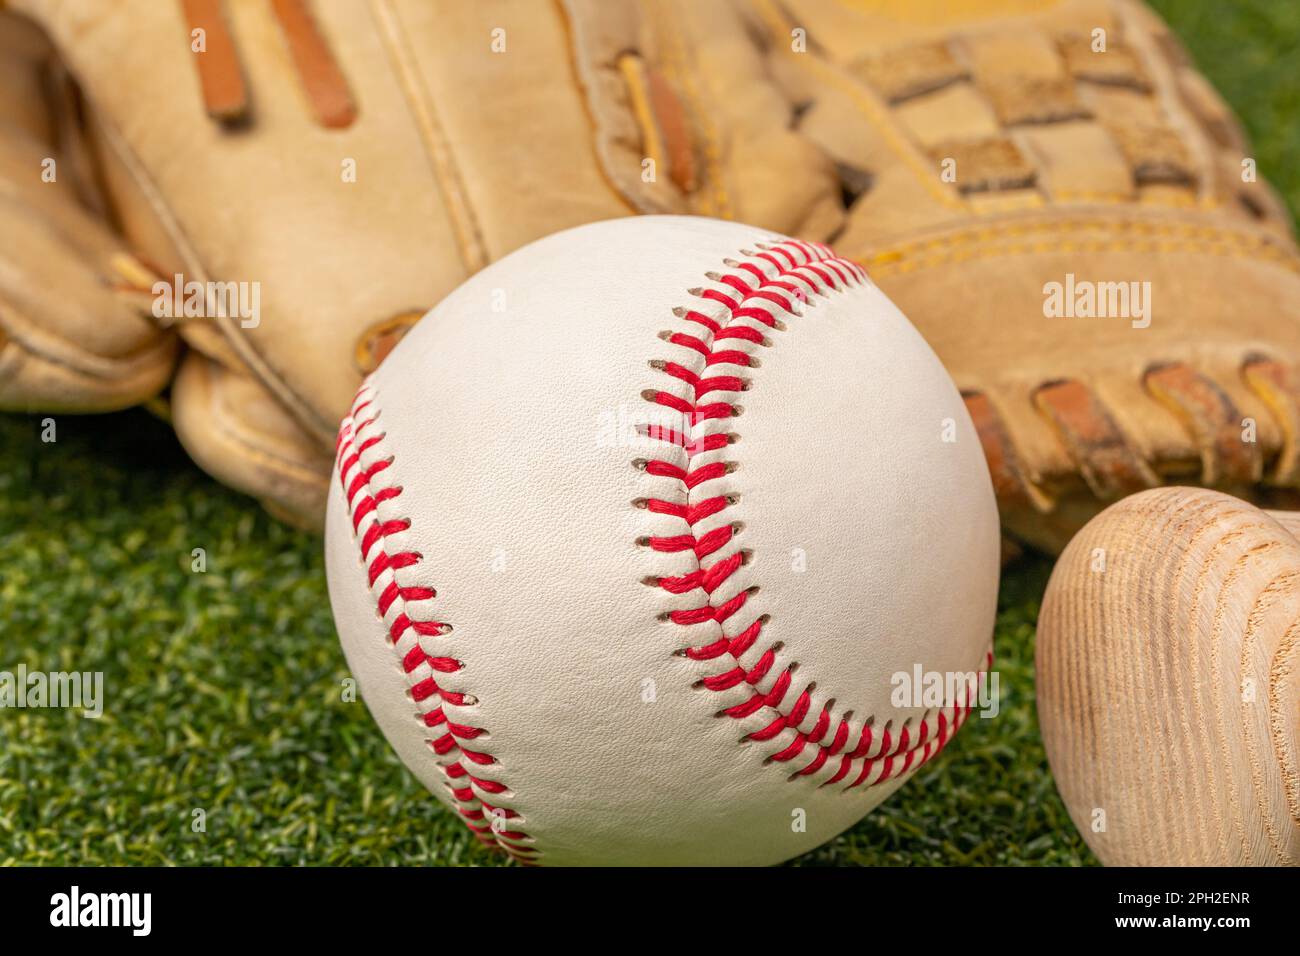 Baseball, glove and wooden bat. Recreational, youth and professional sports concept. Stock Photo